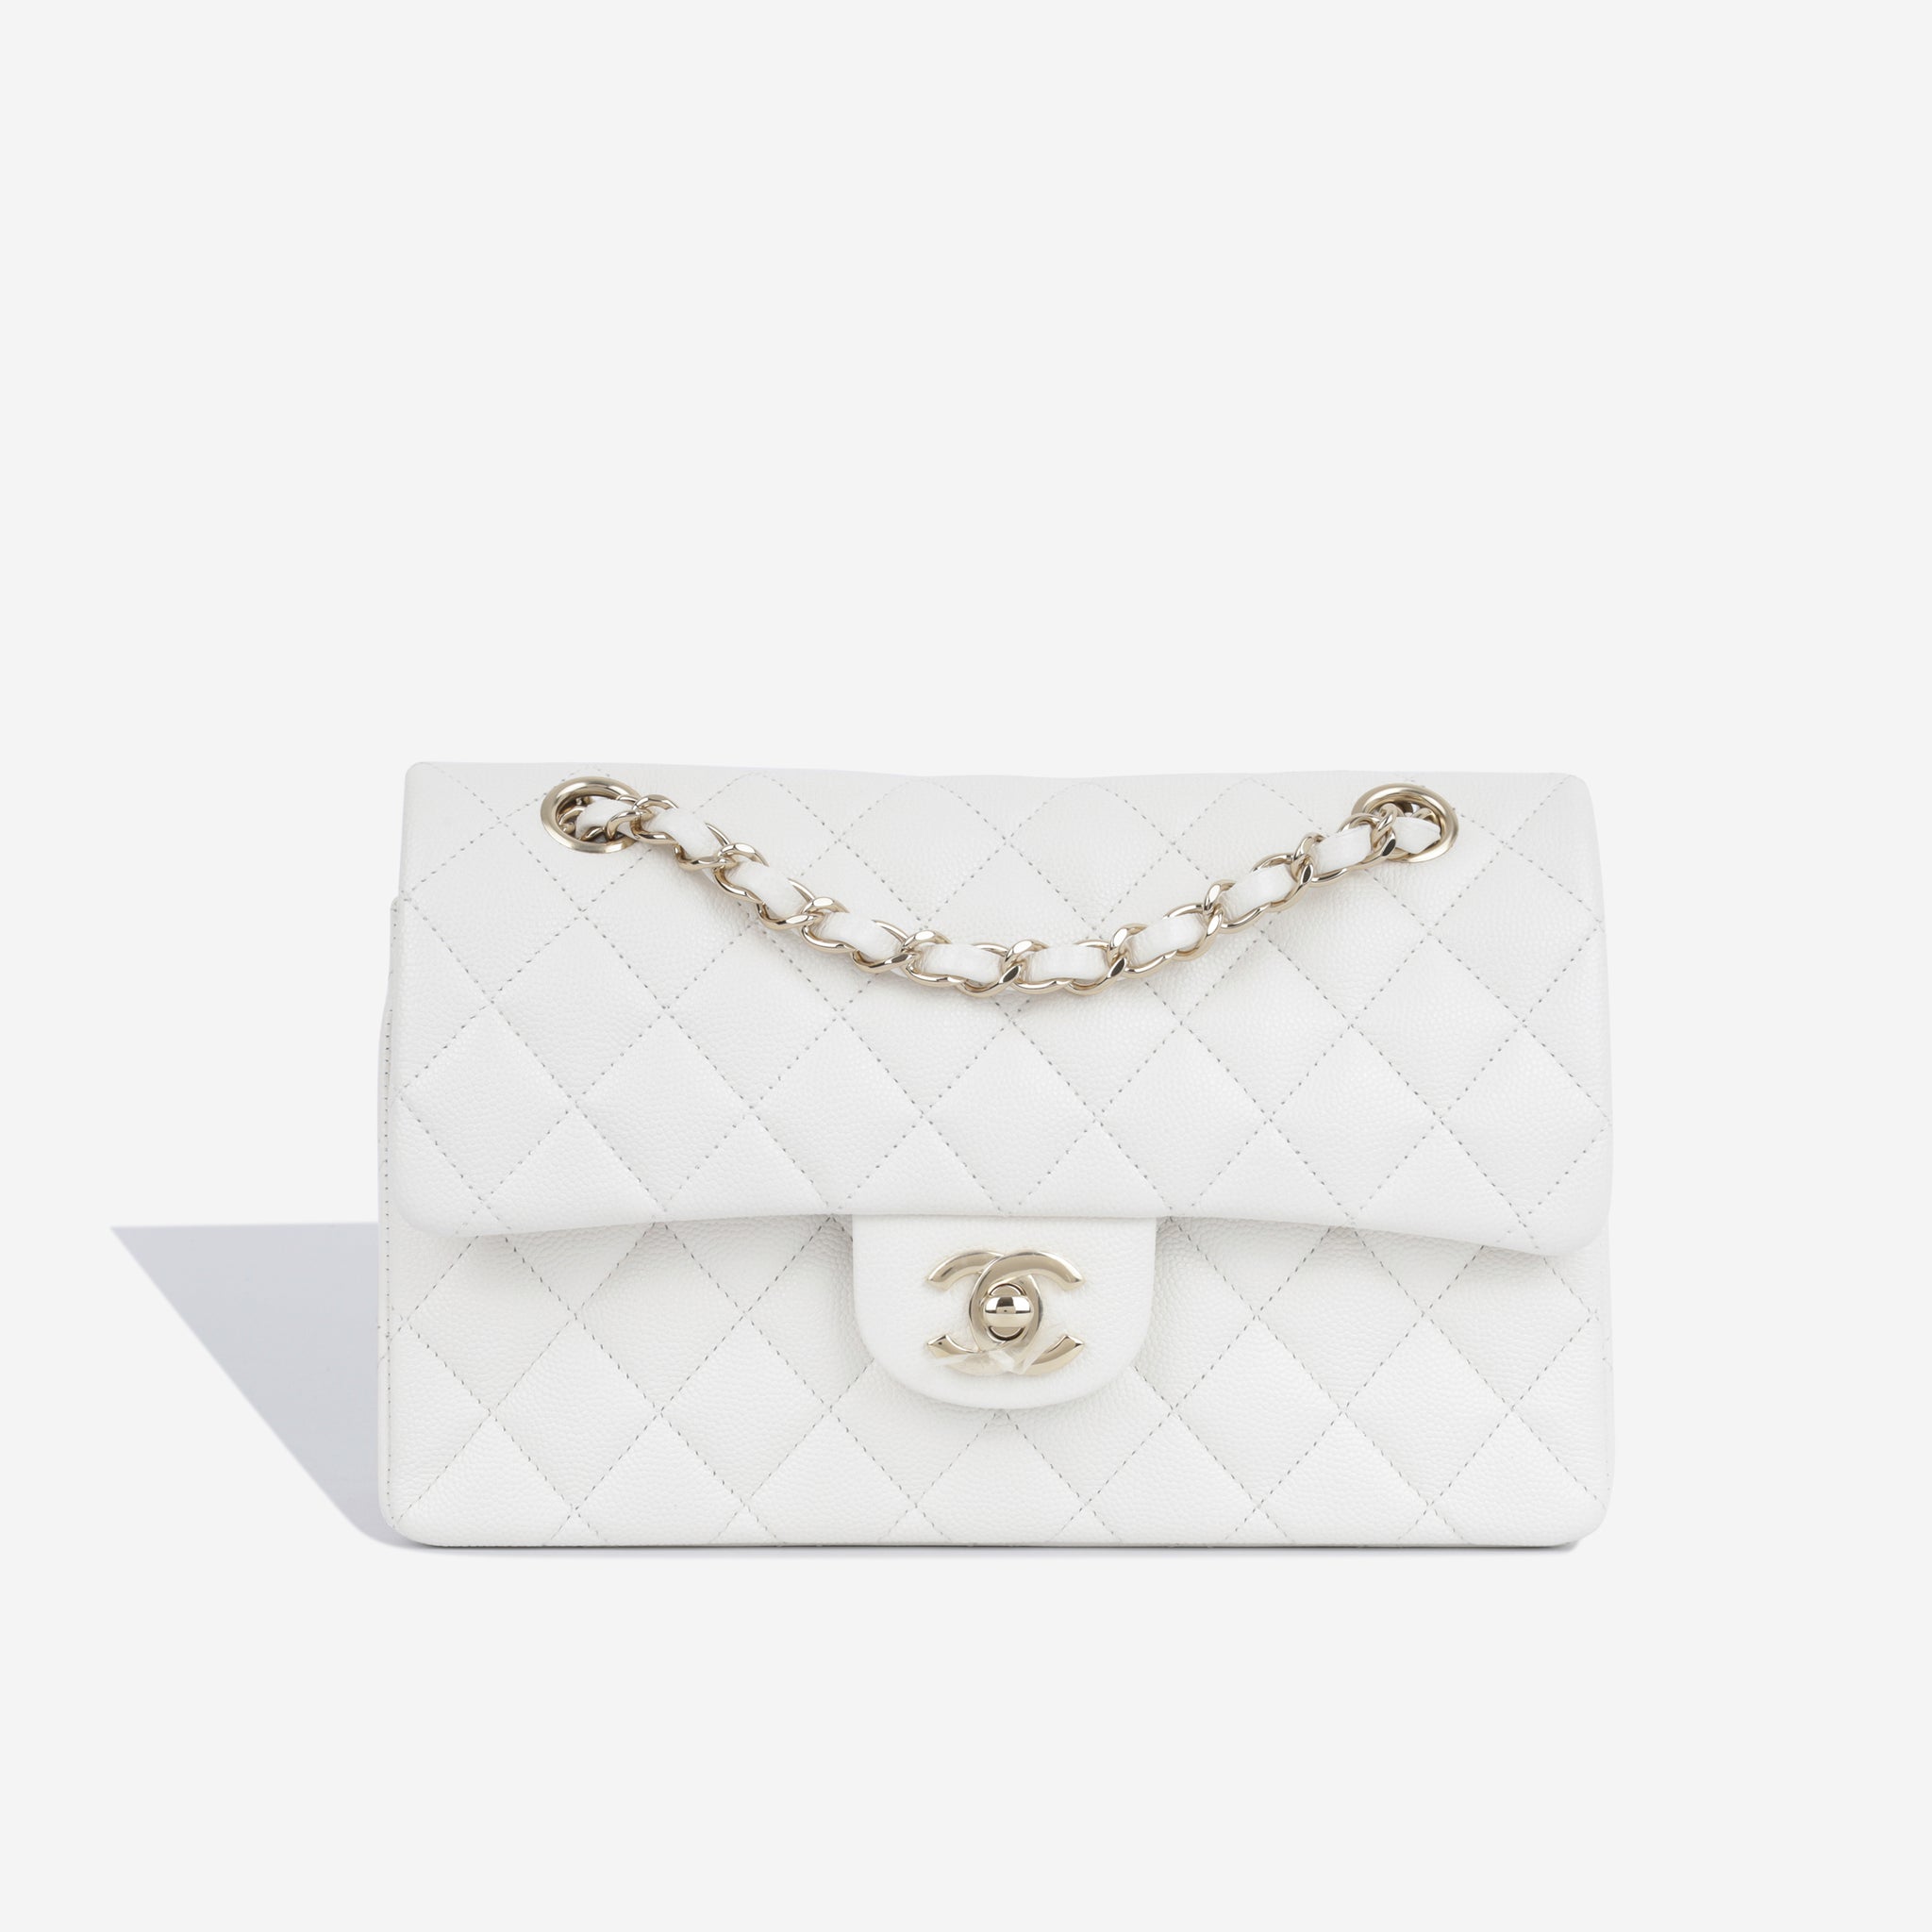 Chanel - Small Classic Flap Bag - White Caviar CGHW - Brand New